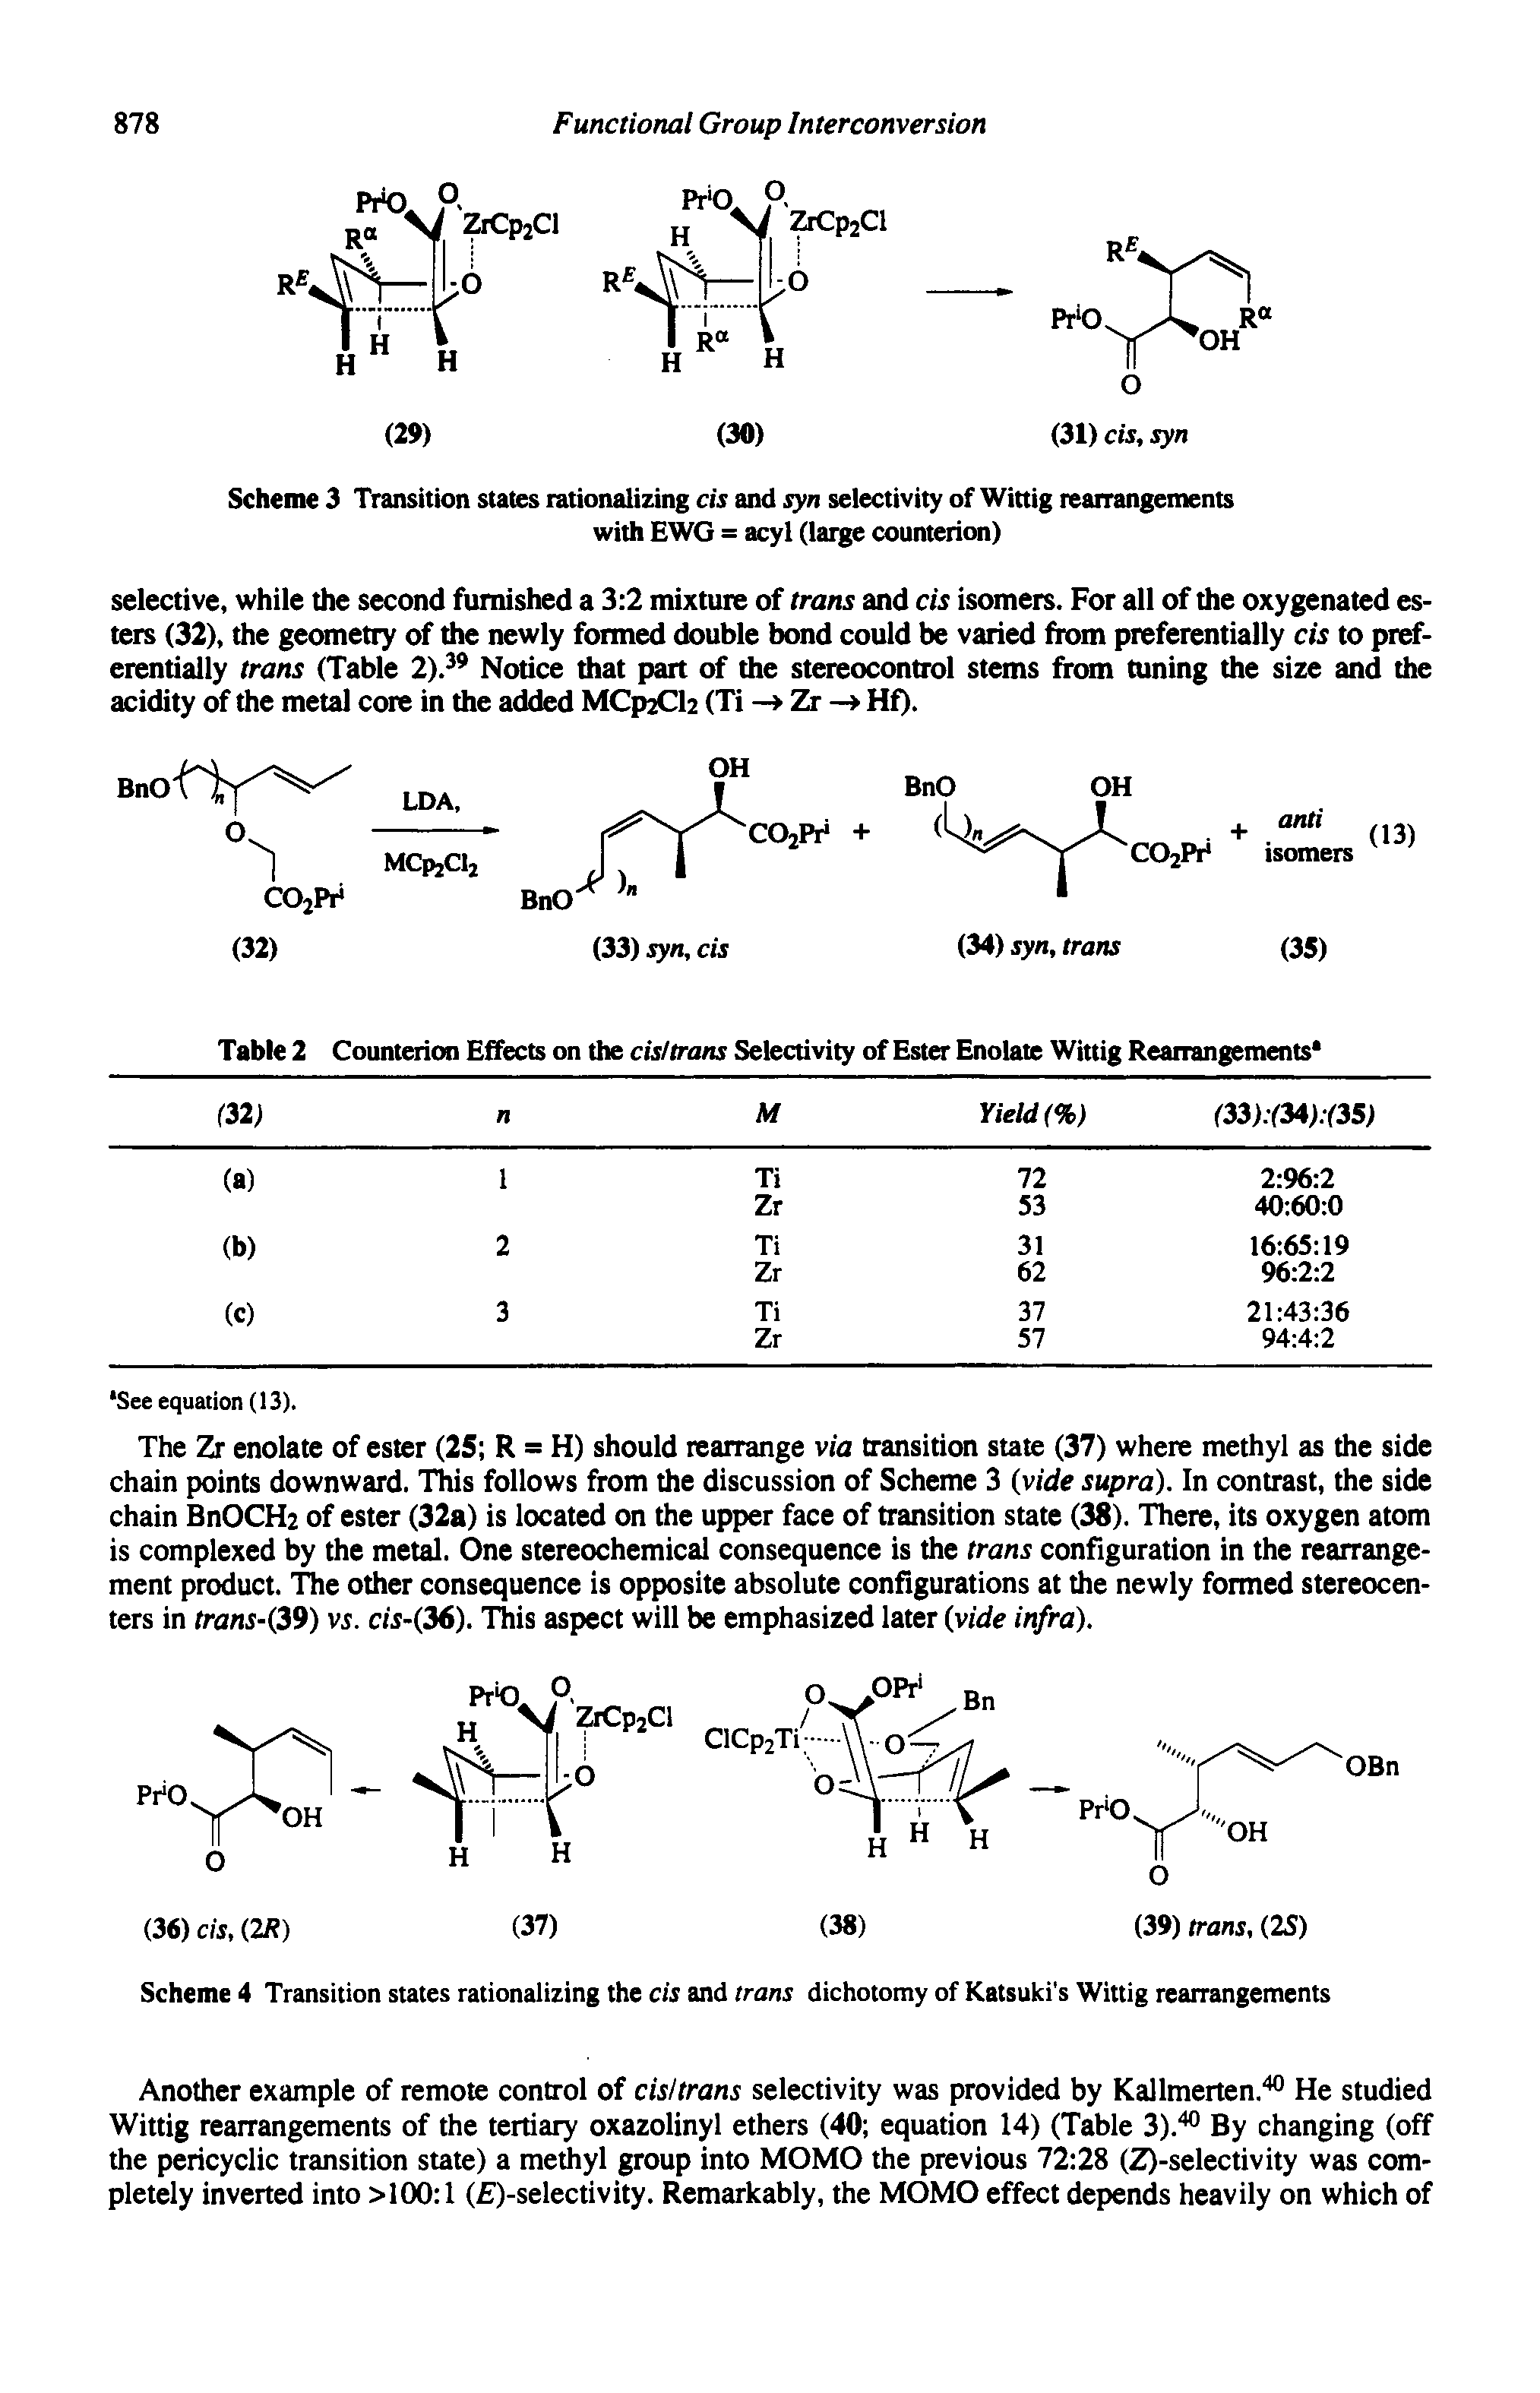 Table 2 Counterion Effects on the cis/trans Selectivity of Ester Enolate Wittig Rearrangements ...